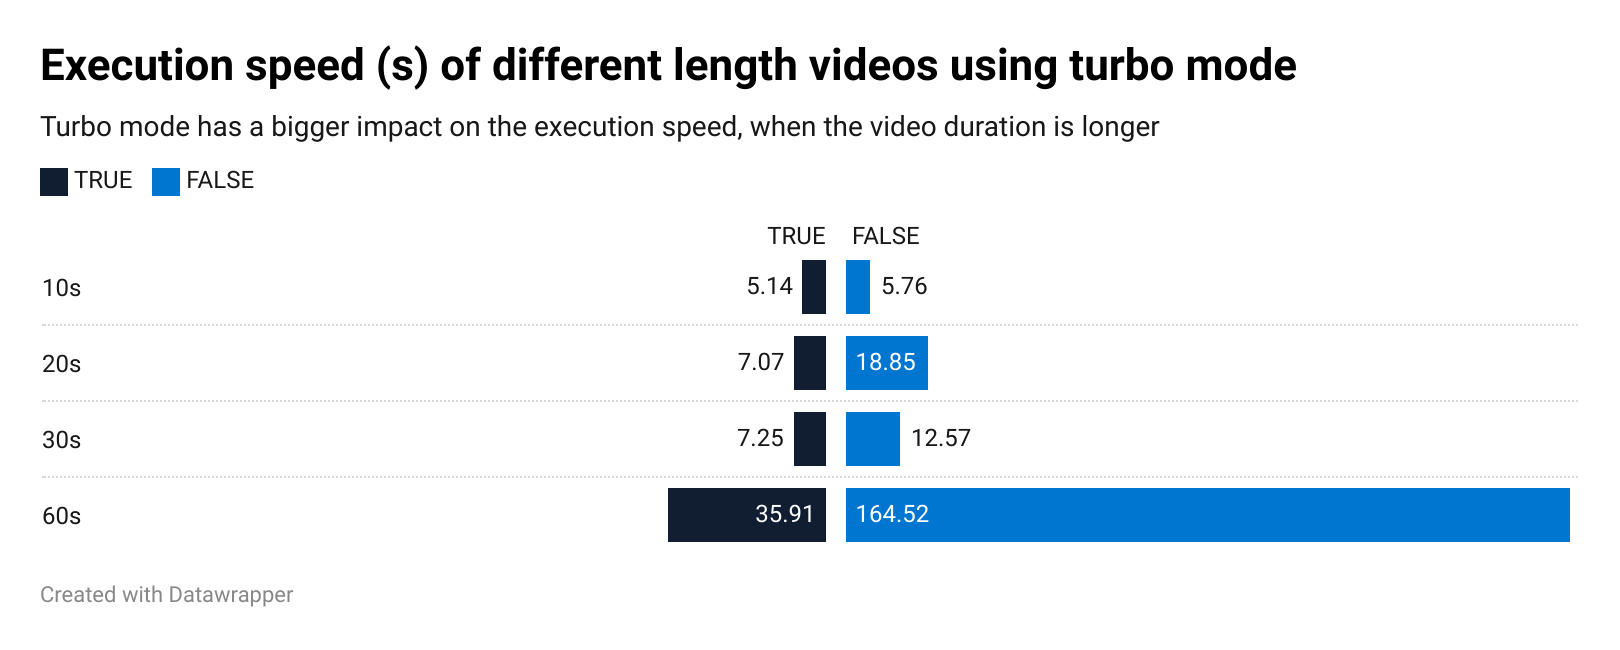 Bar chart showing the execution speed time gain from turbo mode, being more noticeable on videos with a longer duration.